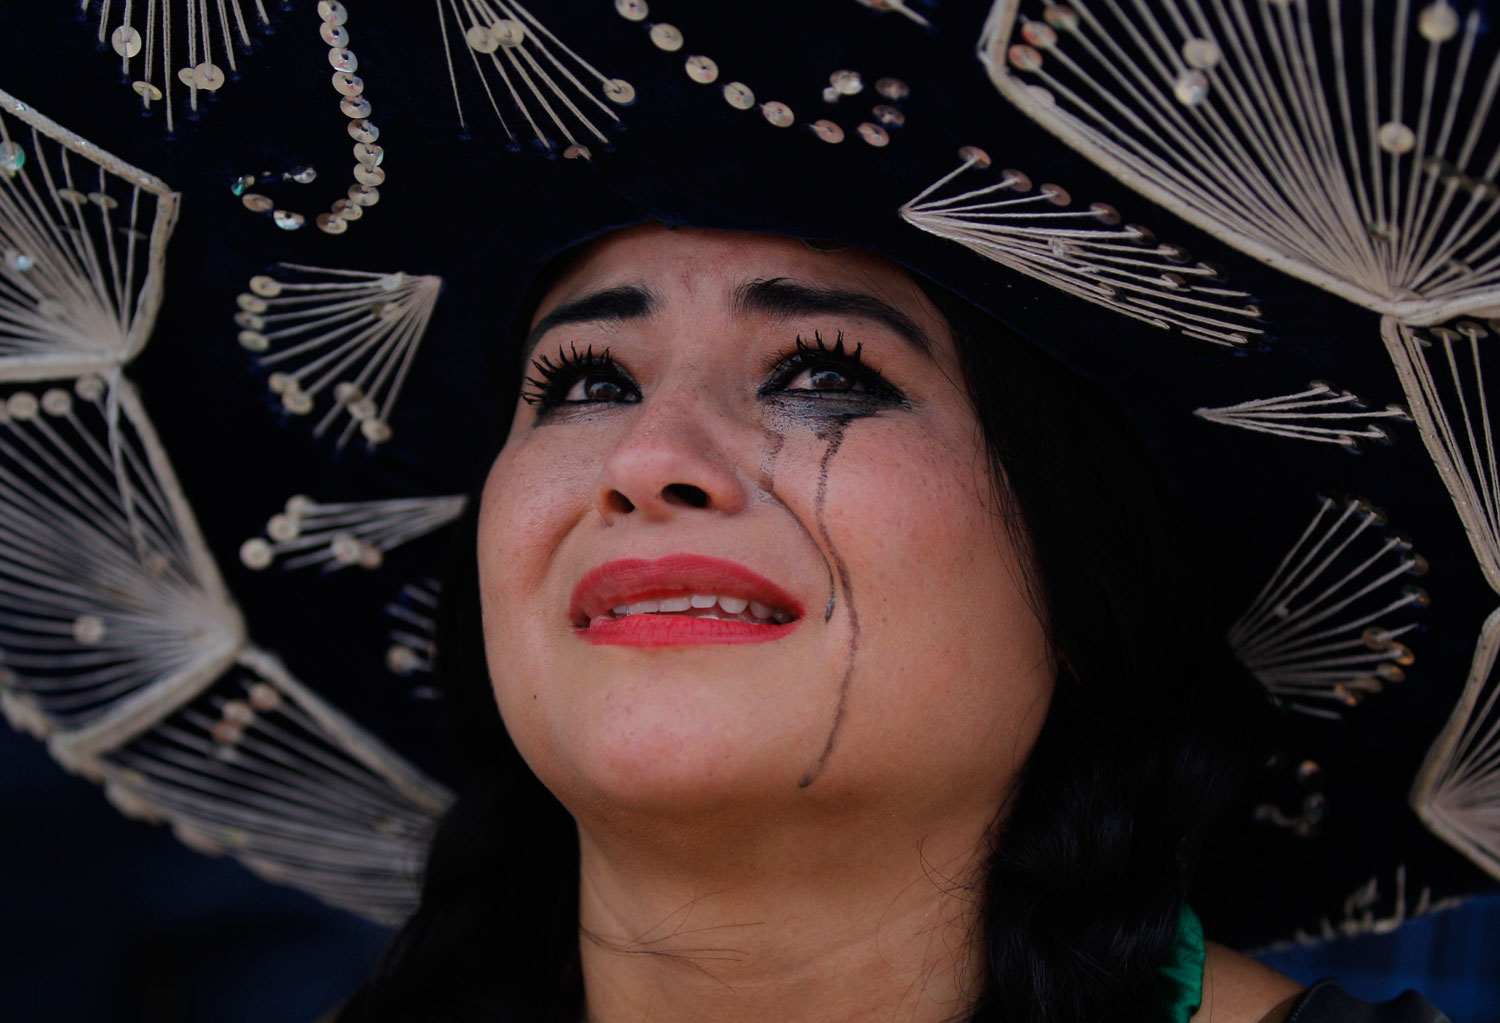 A Mexico soccer fan cries after her team was defeated, on Copacabana beach in Rio de Janeiro, Brazil on June 29, 2014.